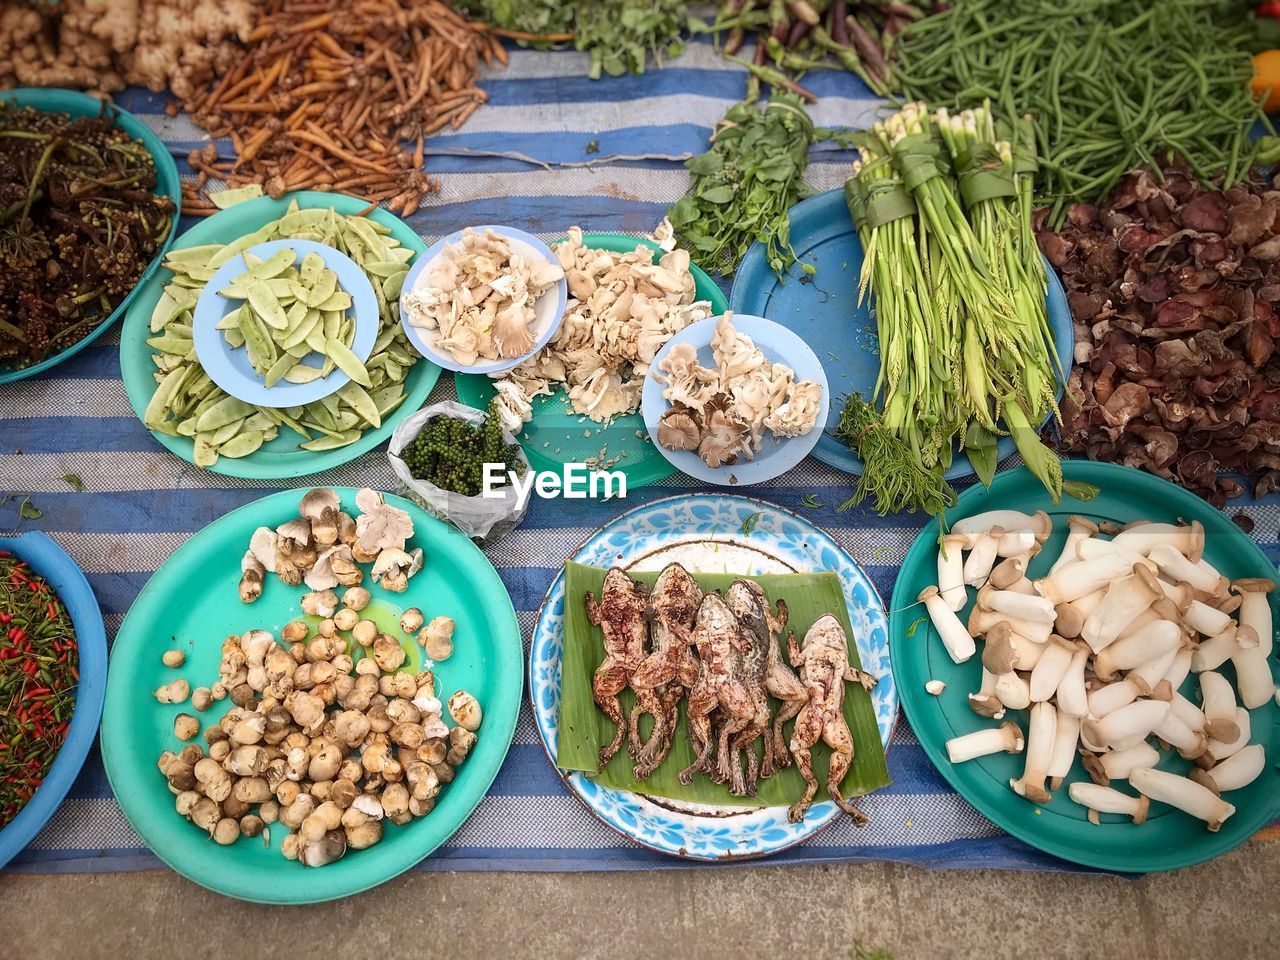 High angle view of various vegetables for sale at market